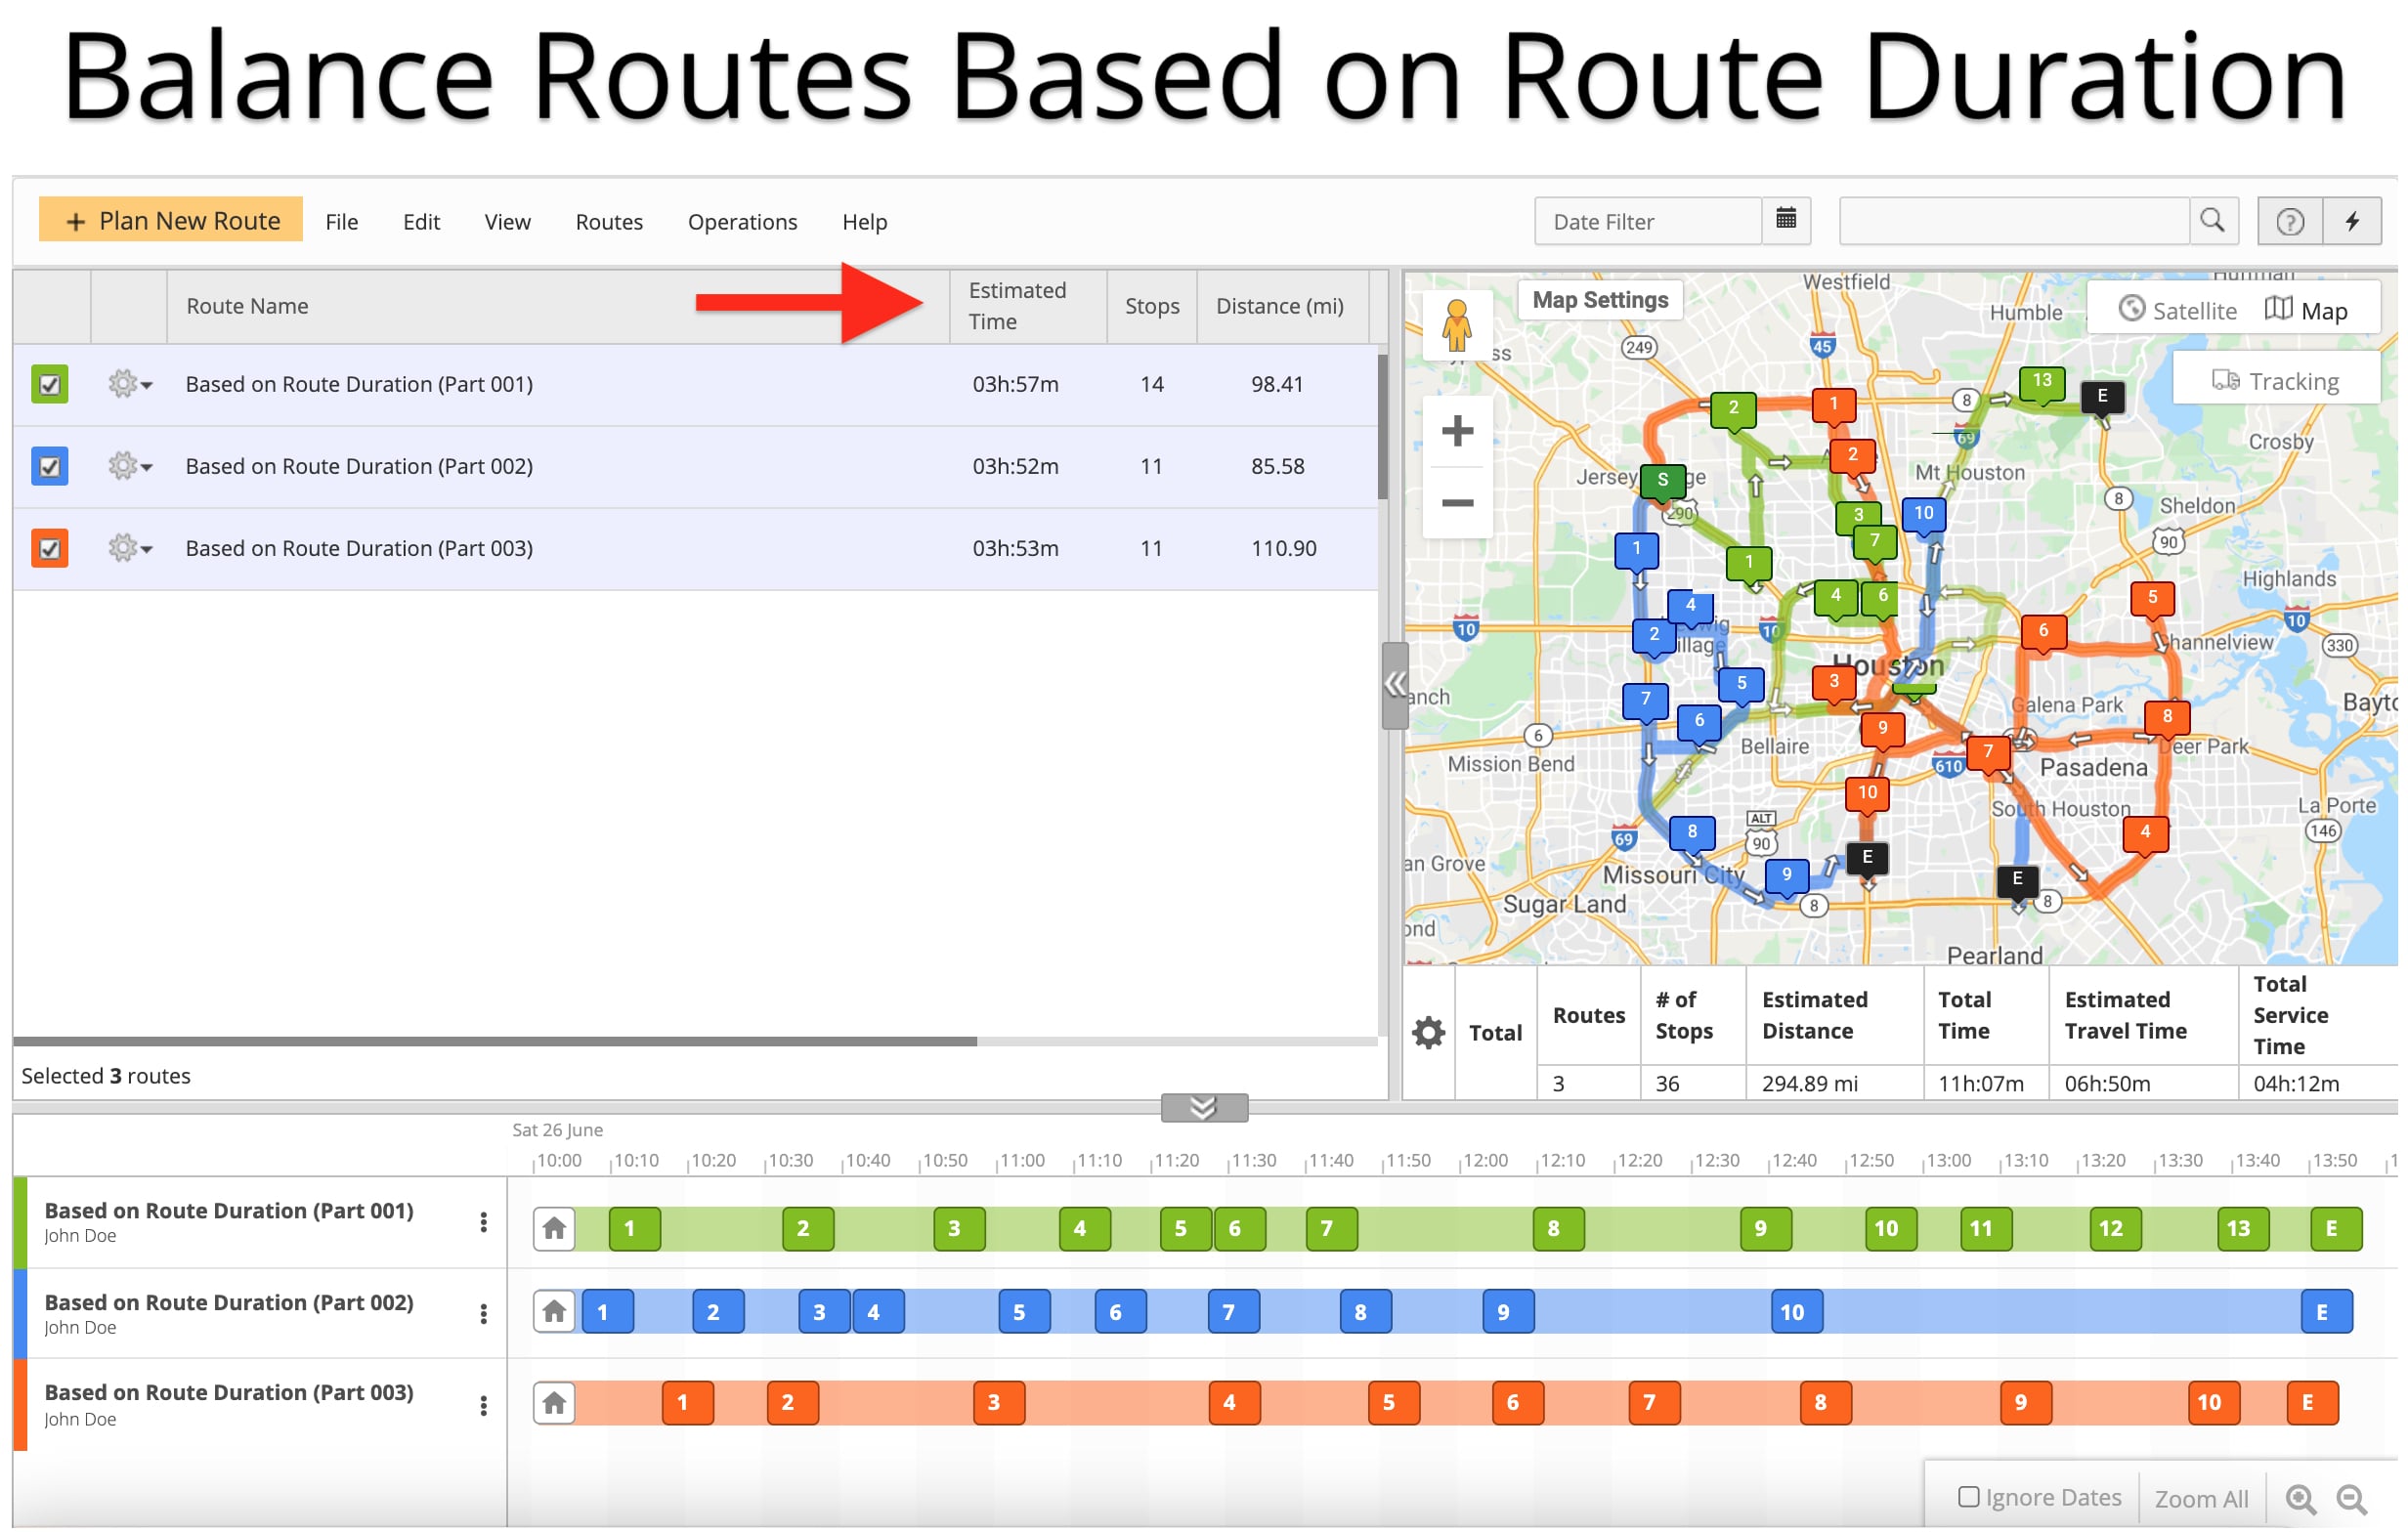 Based on route duration route stops distribution plans routes with almost equal travel times.